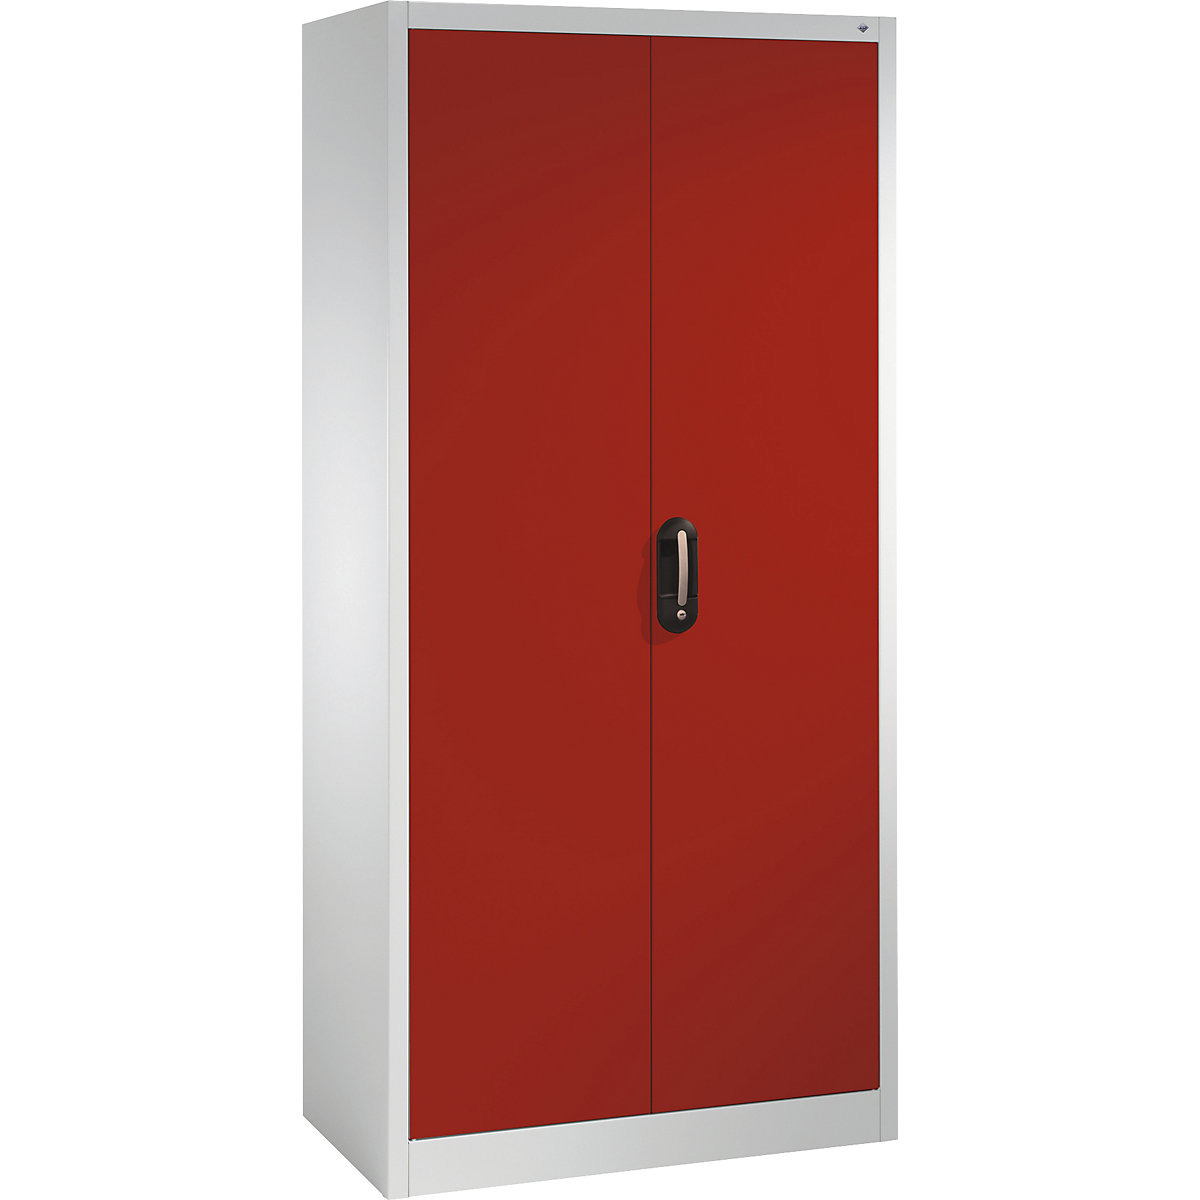 ACURADO universal cupboard – C+P, WxD 930 x 400 mm, light grey / flame red, 2+ items-23